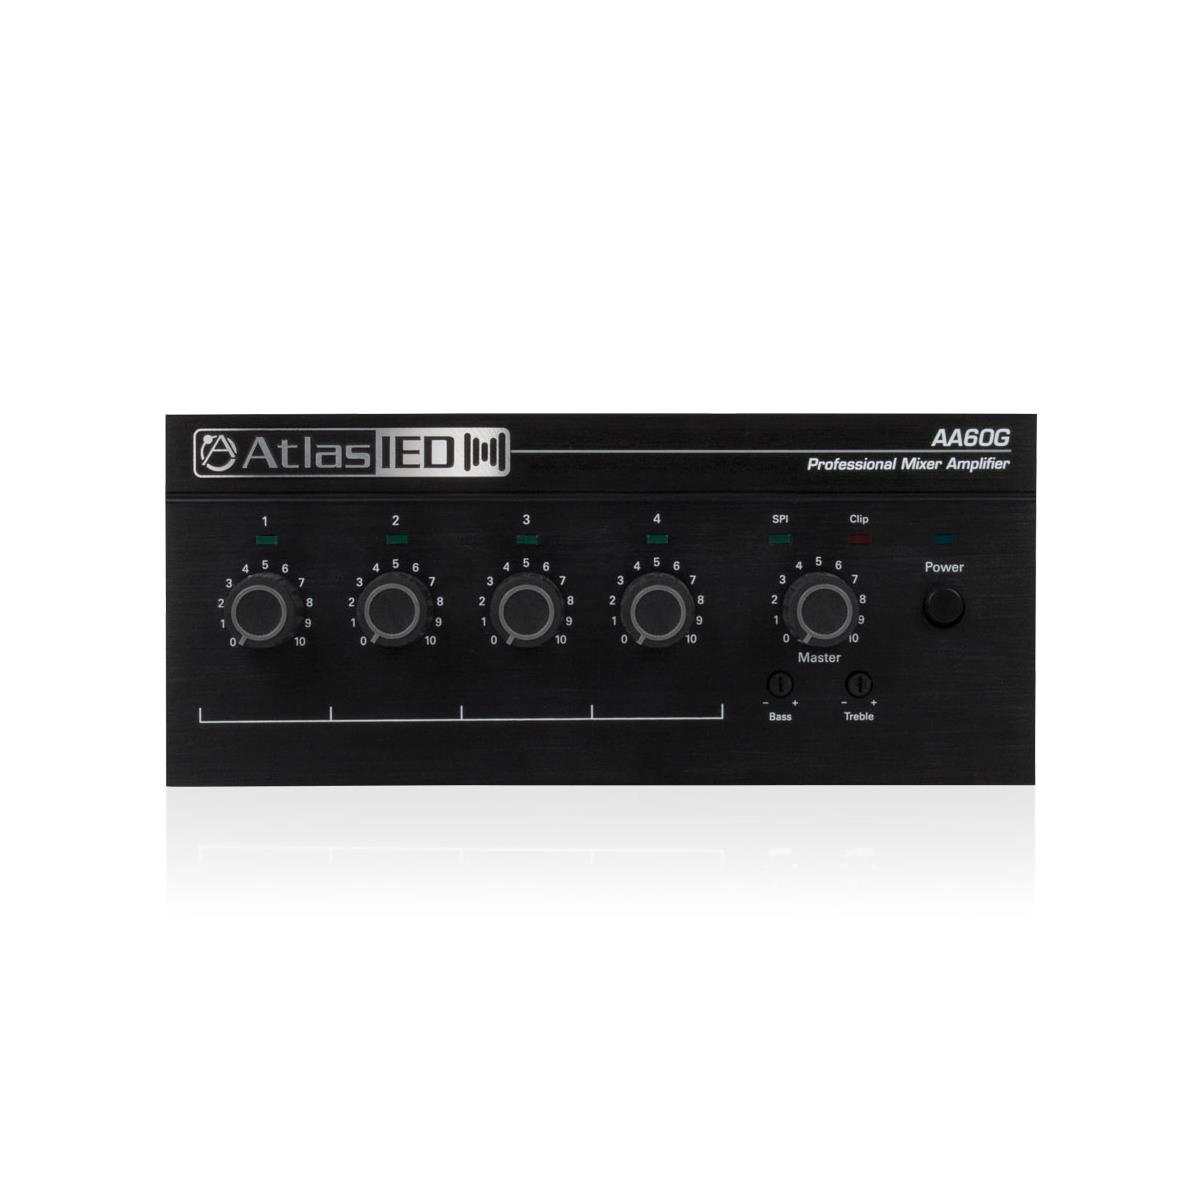 Image of Atlas Sound AA60G 60W 4-Channel Commercial Mixer Amplifier